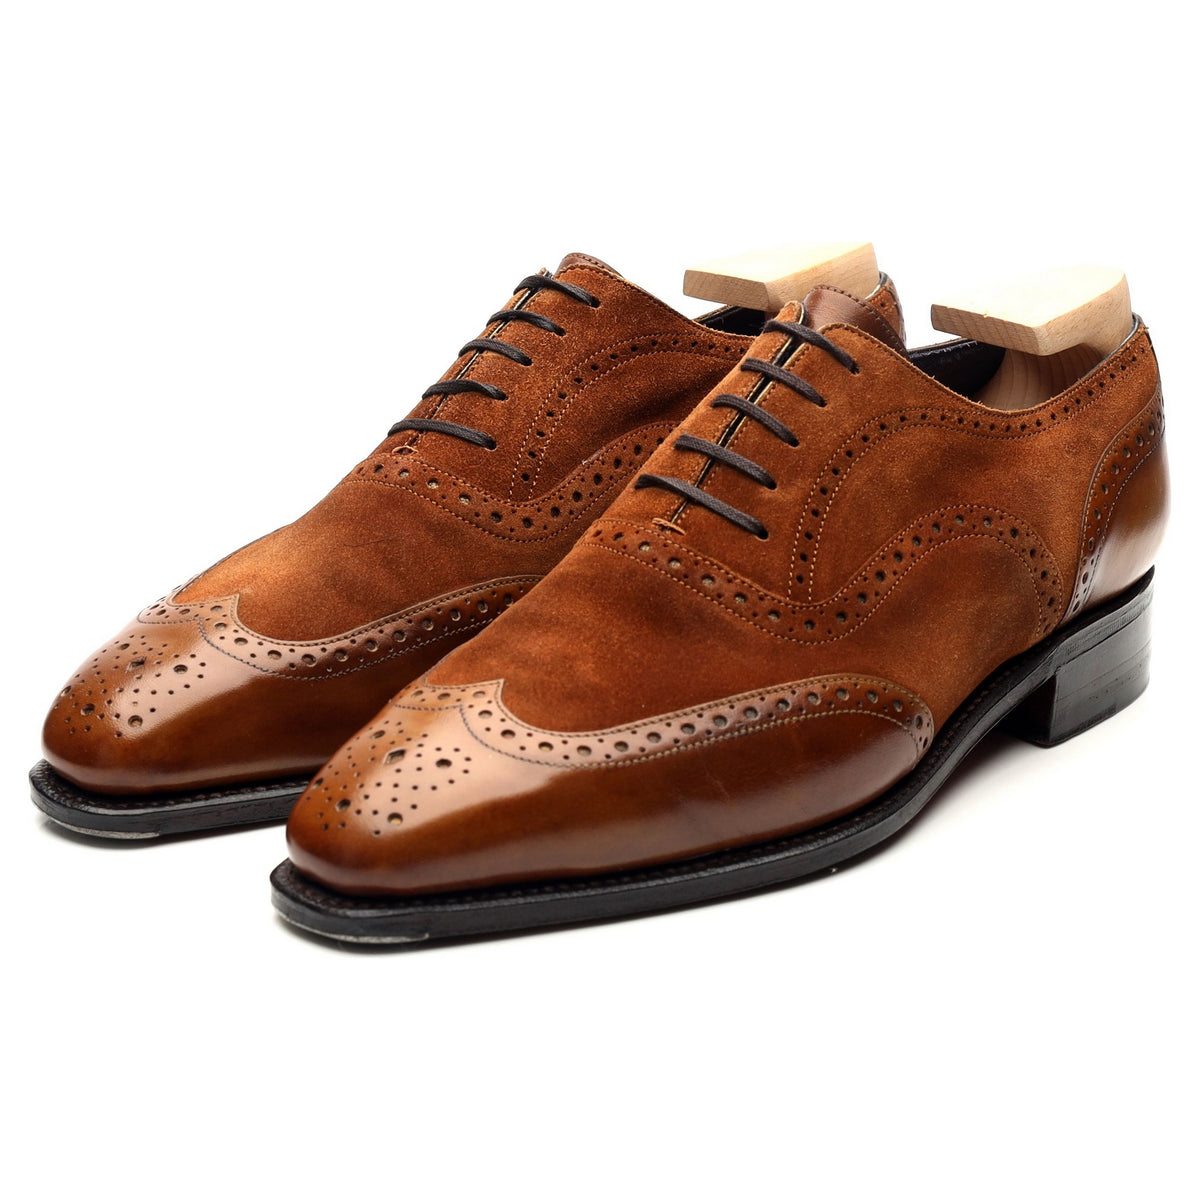 &#39;Vendome&#39; Brown Leather Suede Oxford Brogues UK 6.5 E